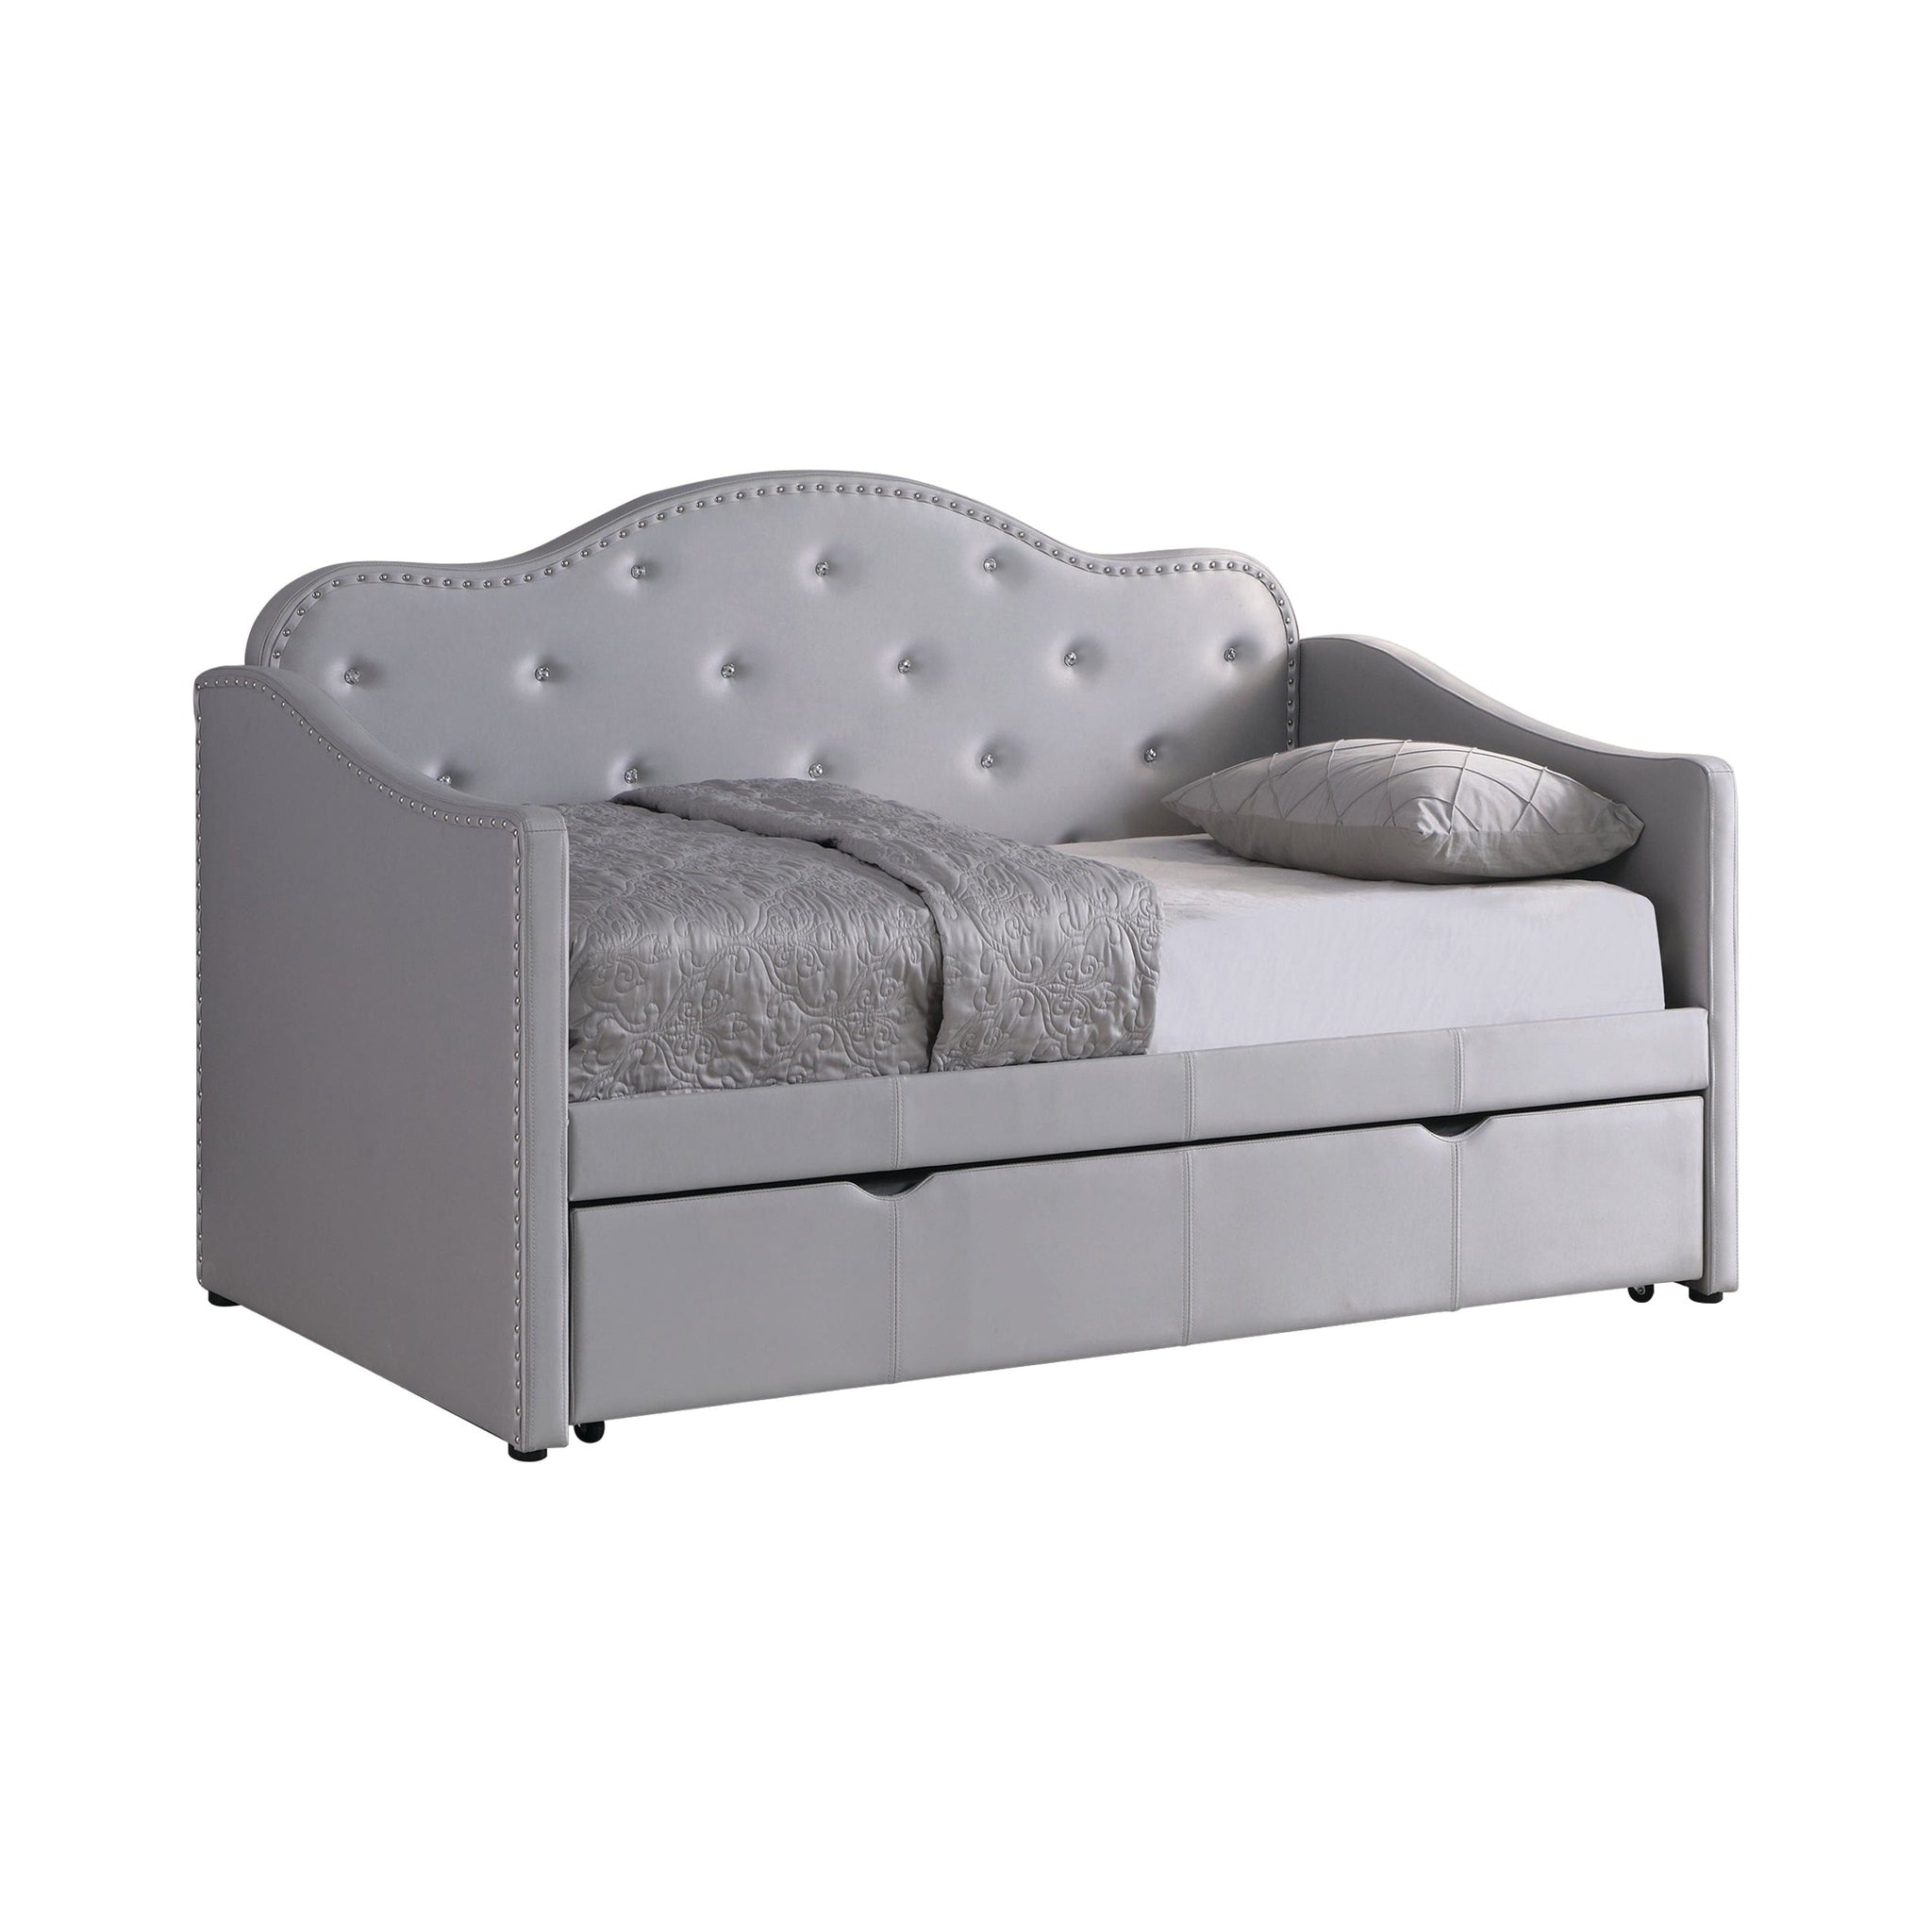 Upholstered Twin Daybed With Trundle Pearlescent Grey - 300629